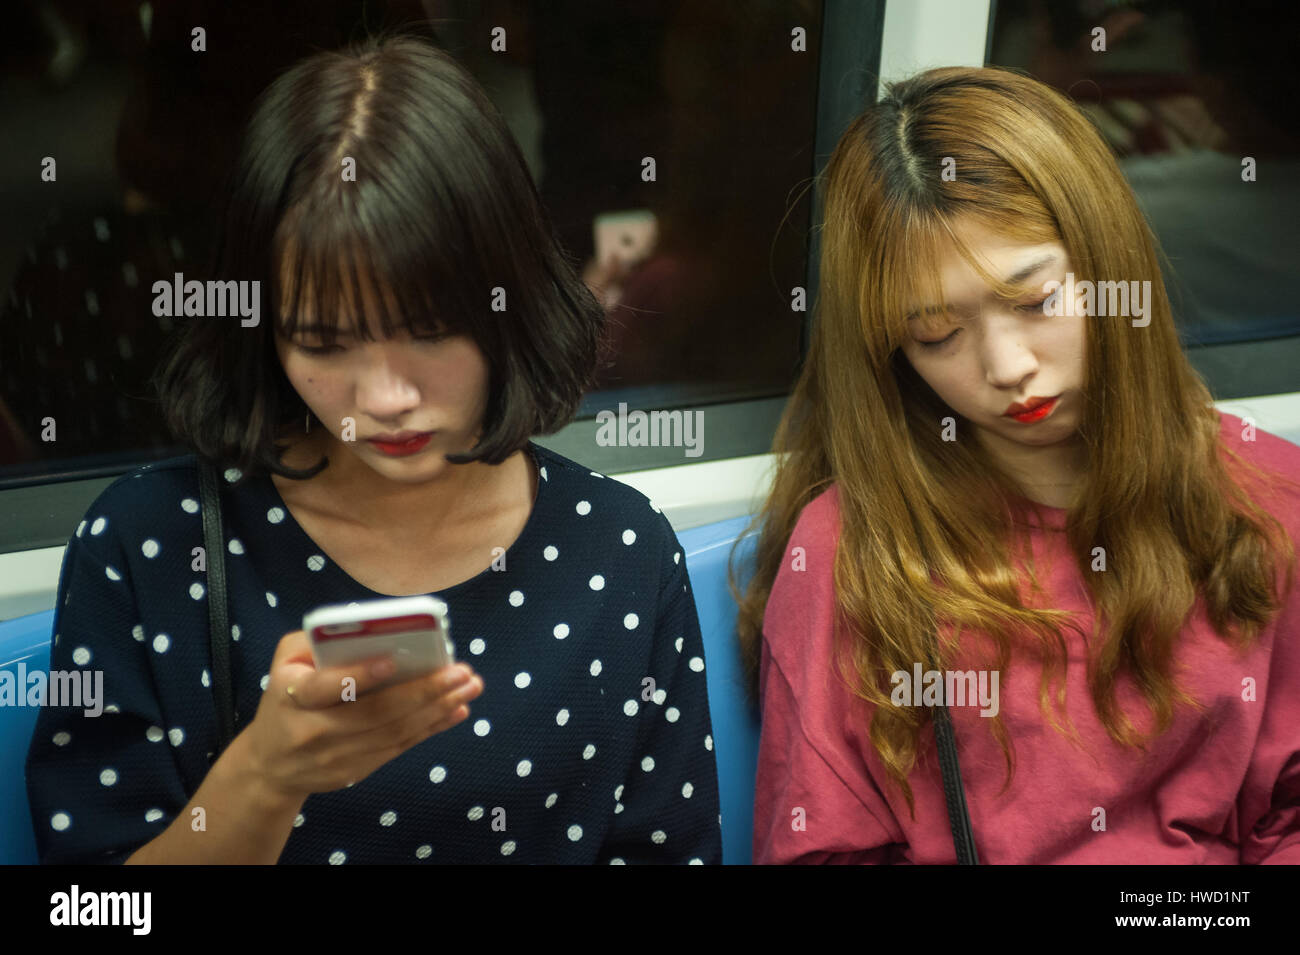 22.09.2016, Singapore, Republic of Singapore - Two young women on a metro in Singapore. Stock Photo